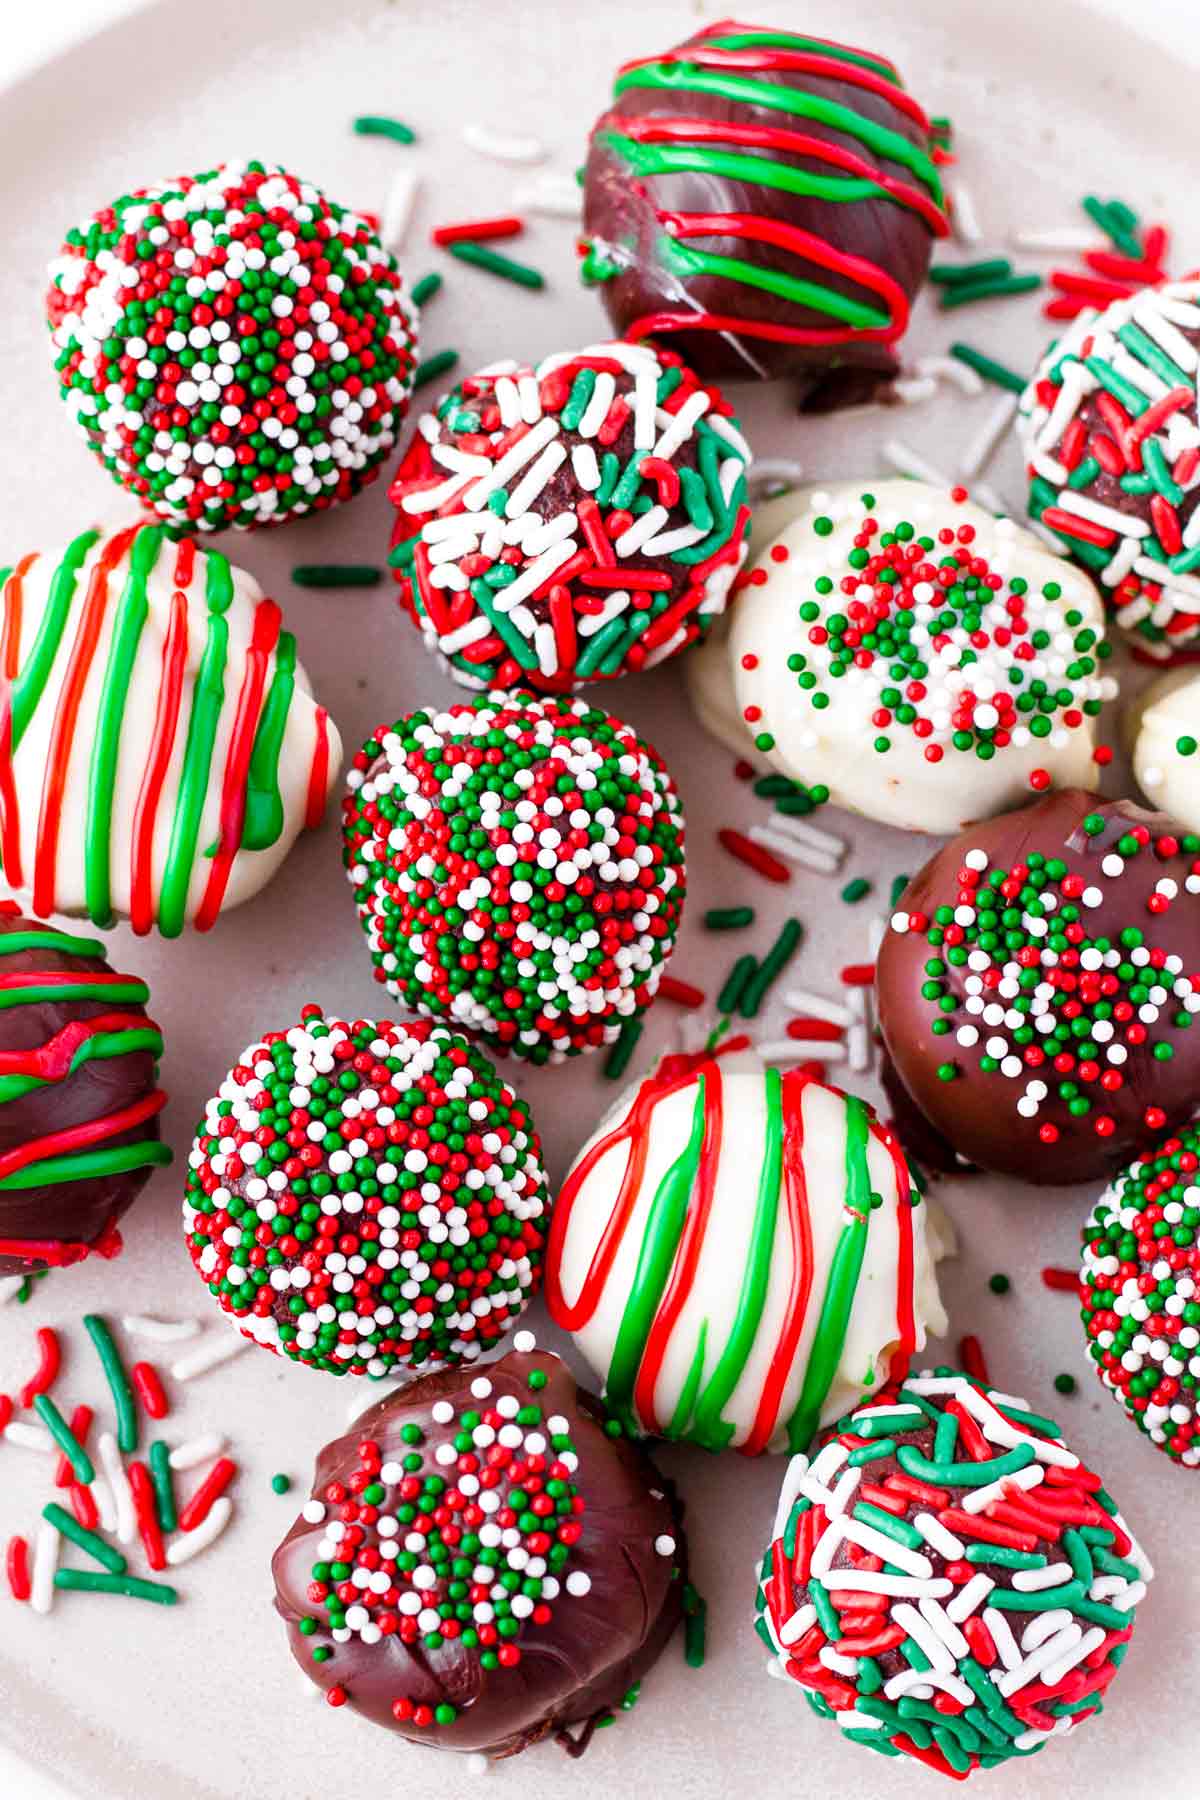 several Christmas truffles dipped in chocolate and sprinkles